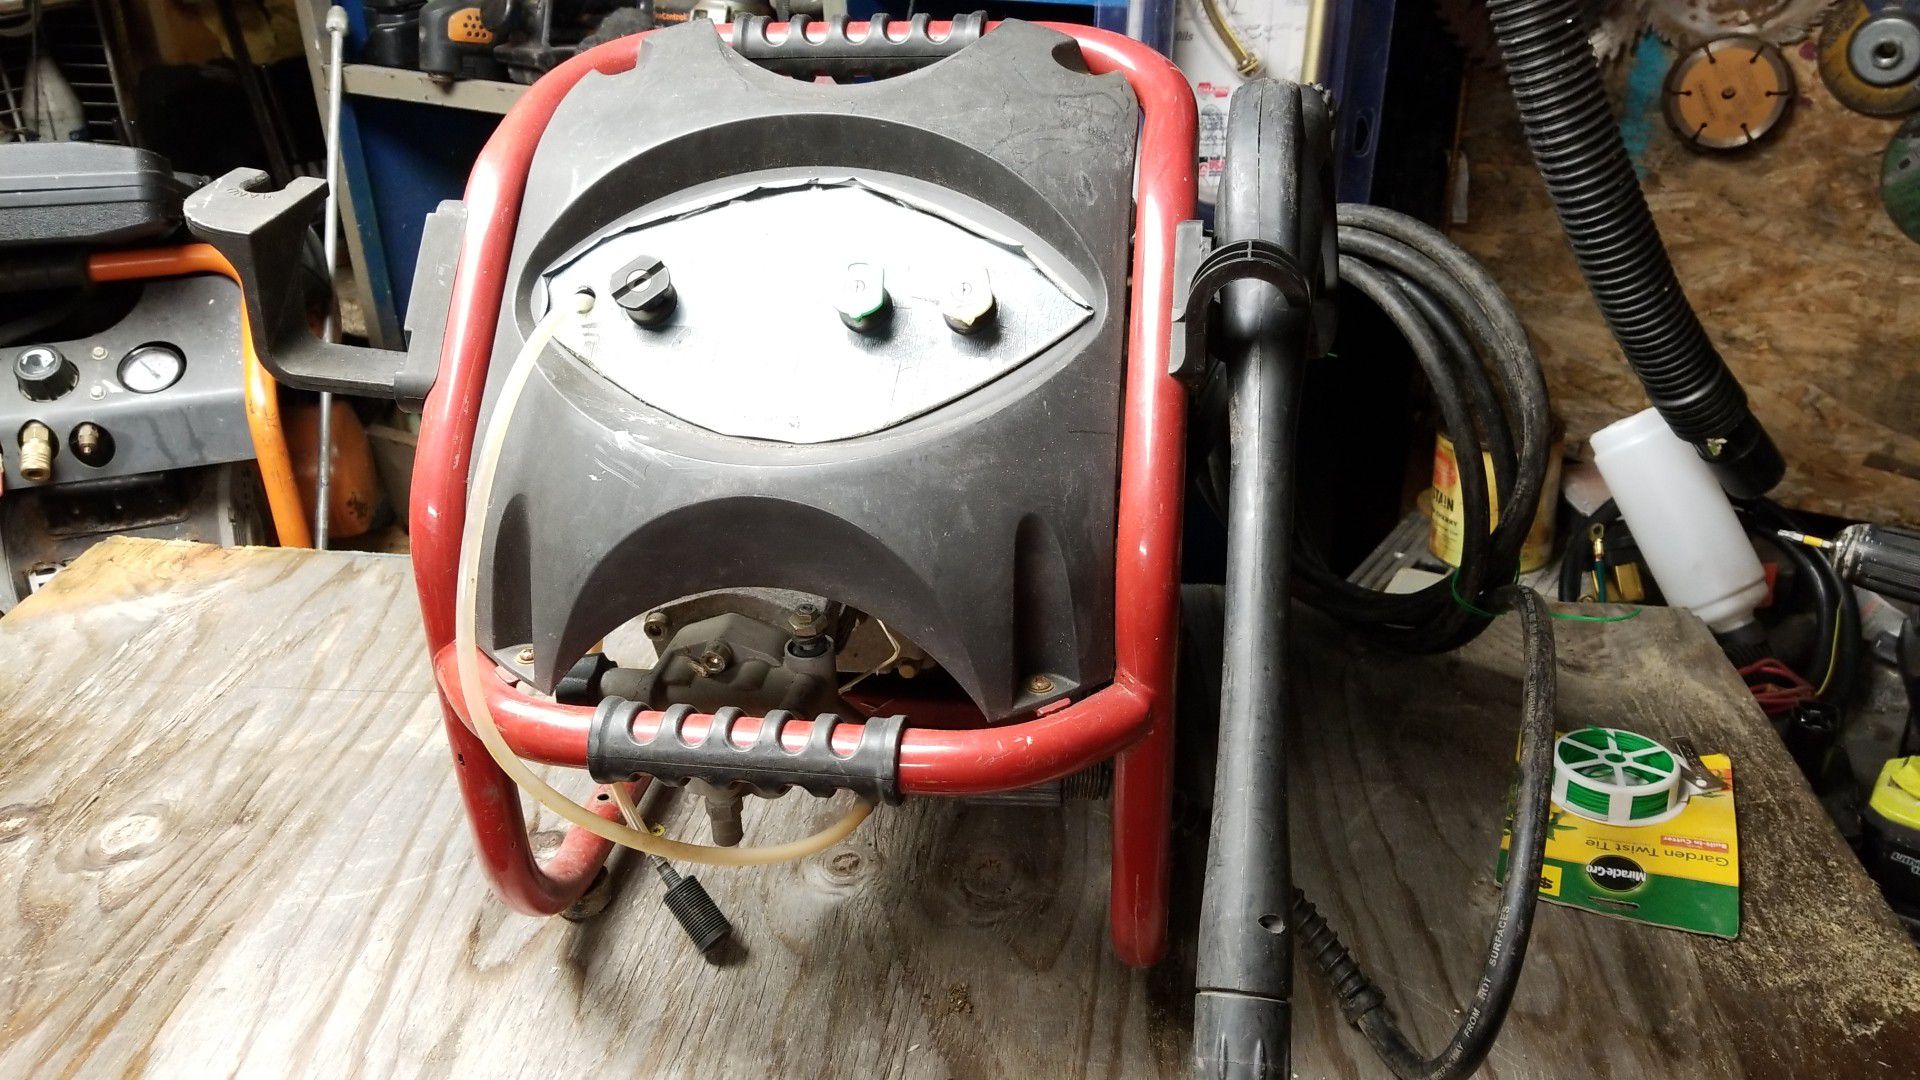 Power mate gas pressure washer